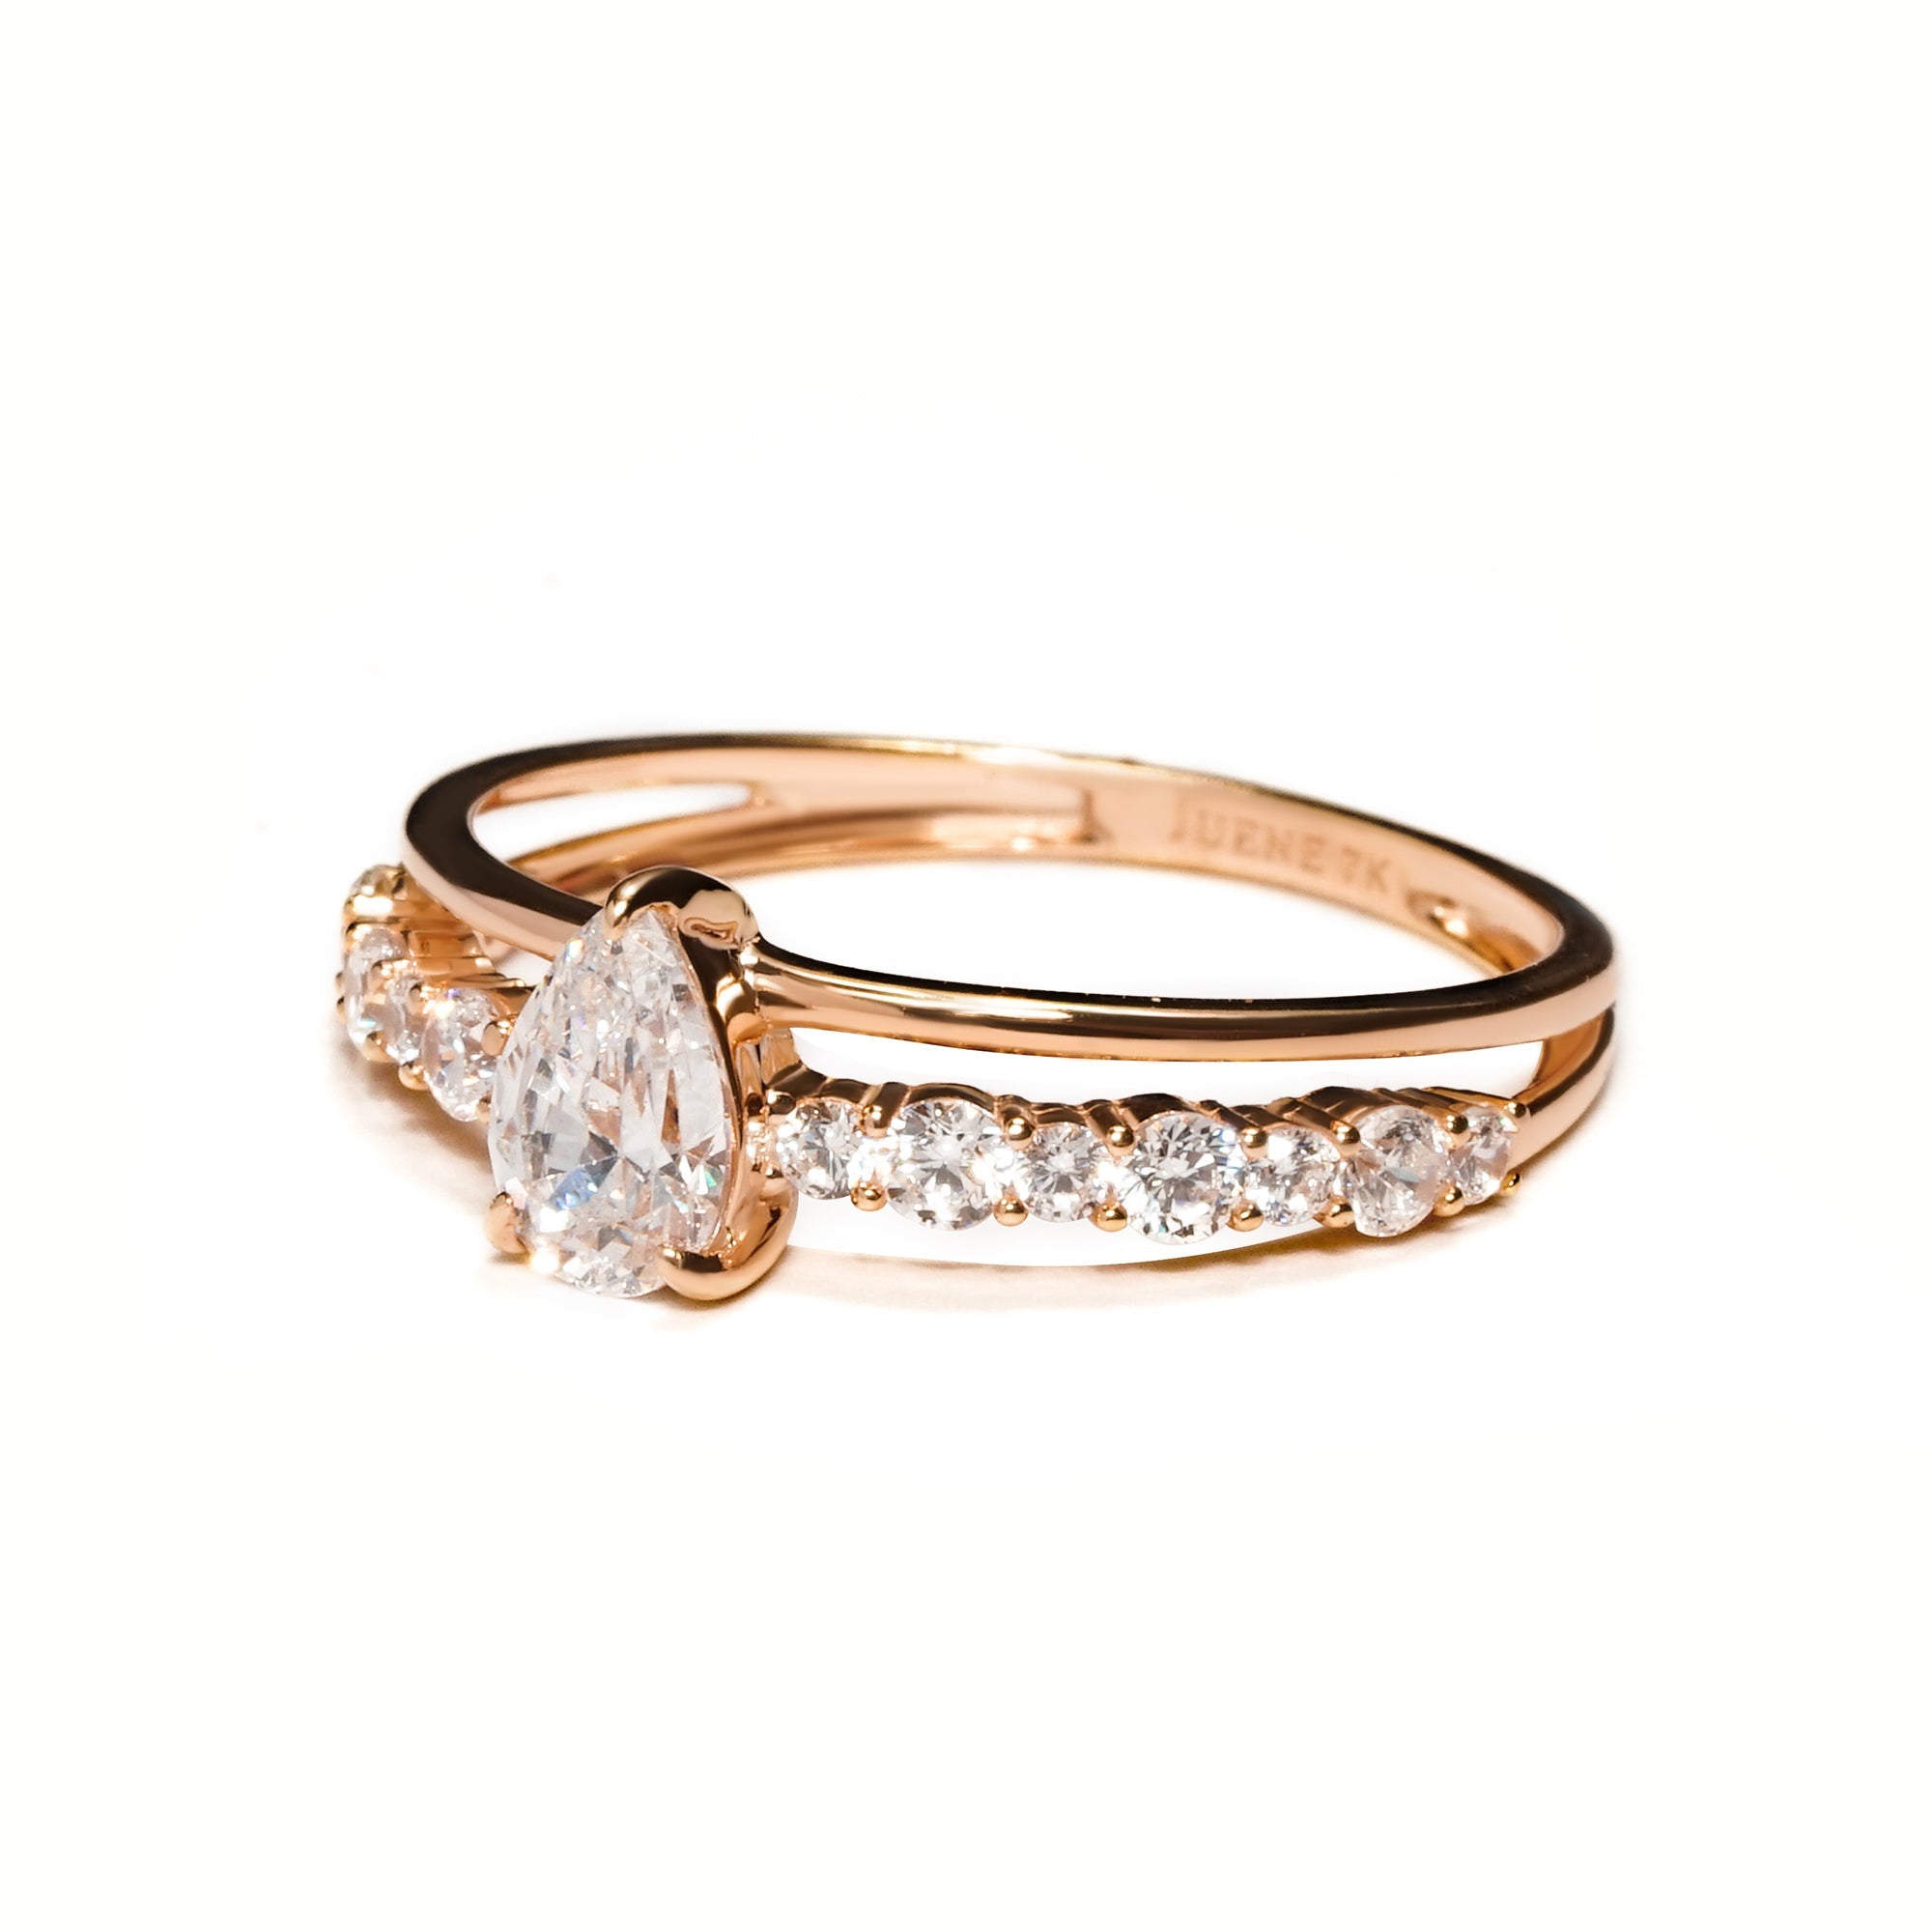 Rania Gold Ring - Serene Collection - Juene Jewelry